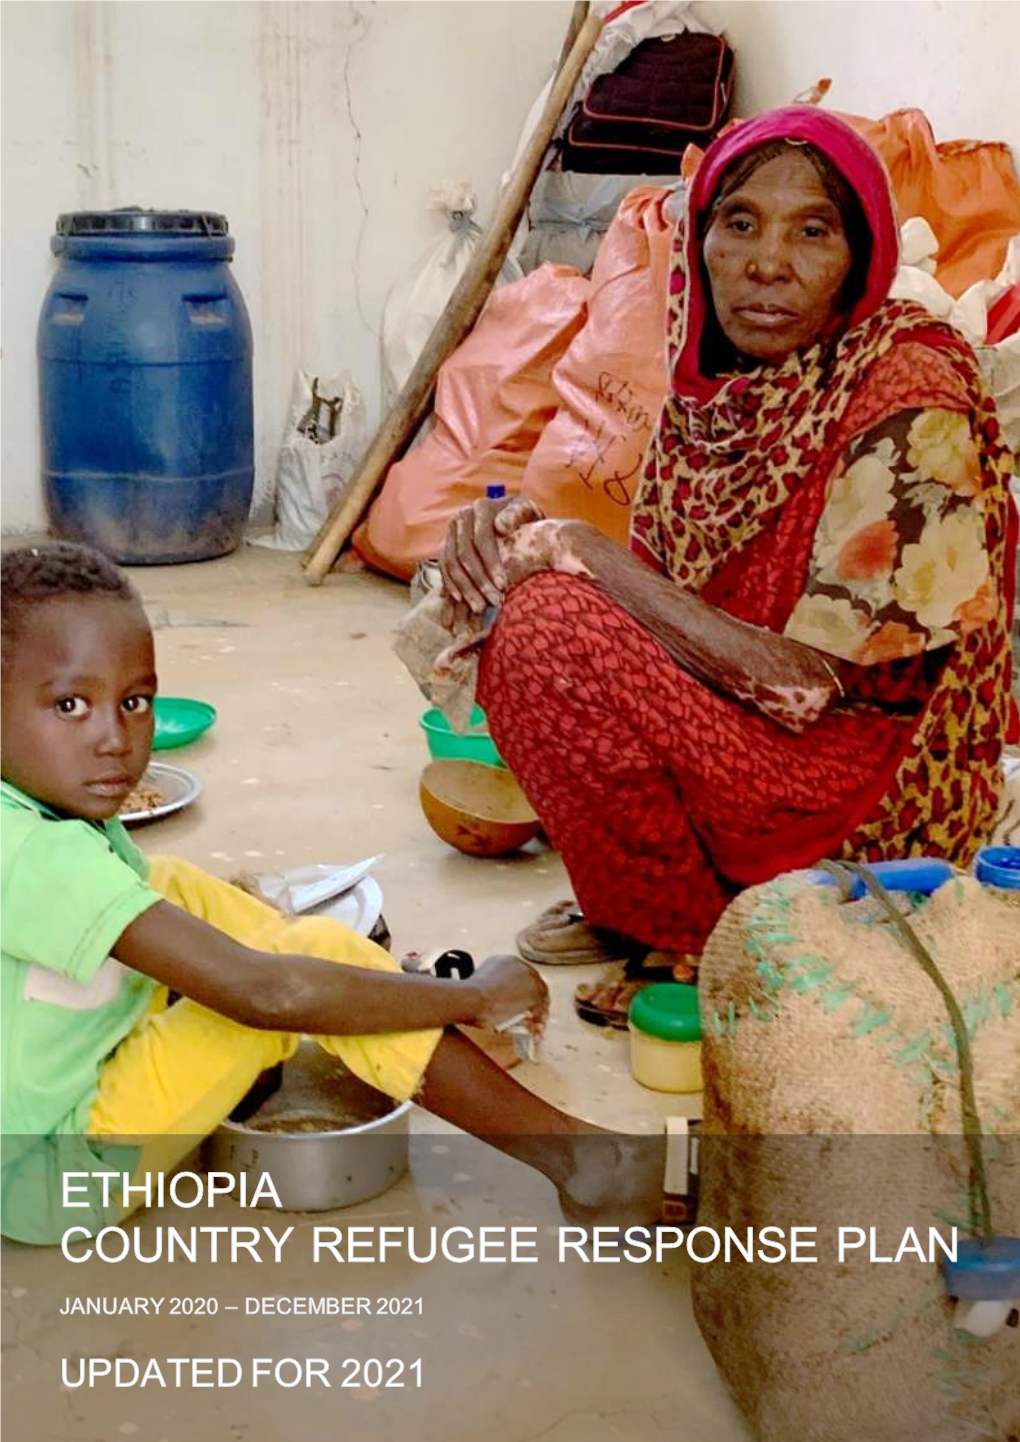 2021 Ethiopia Country Refugee Response Plan Here